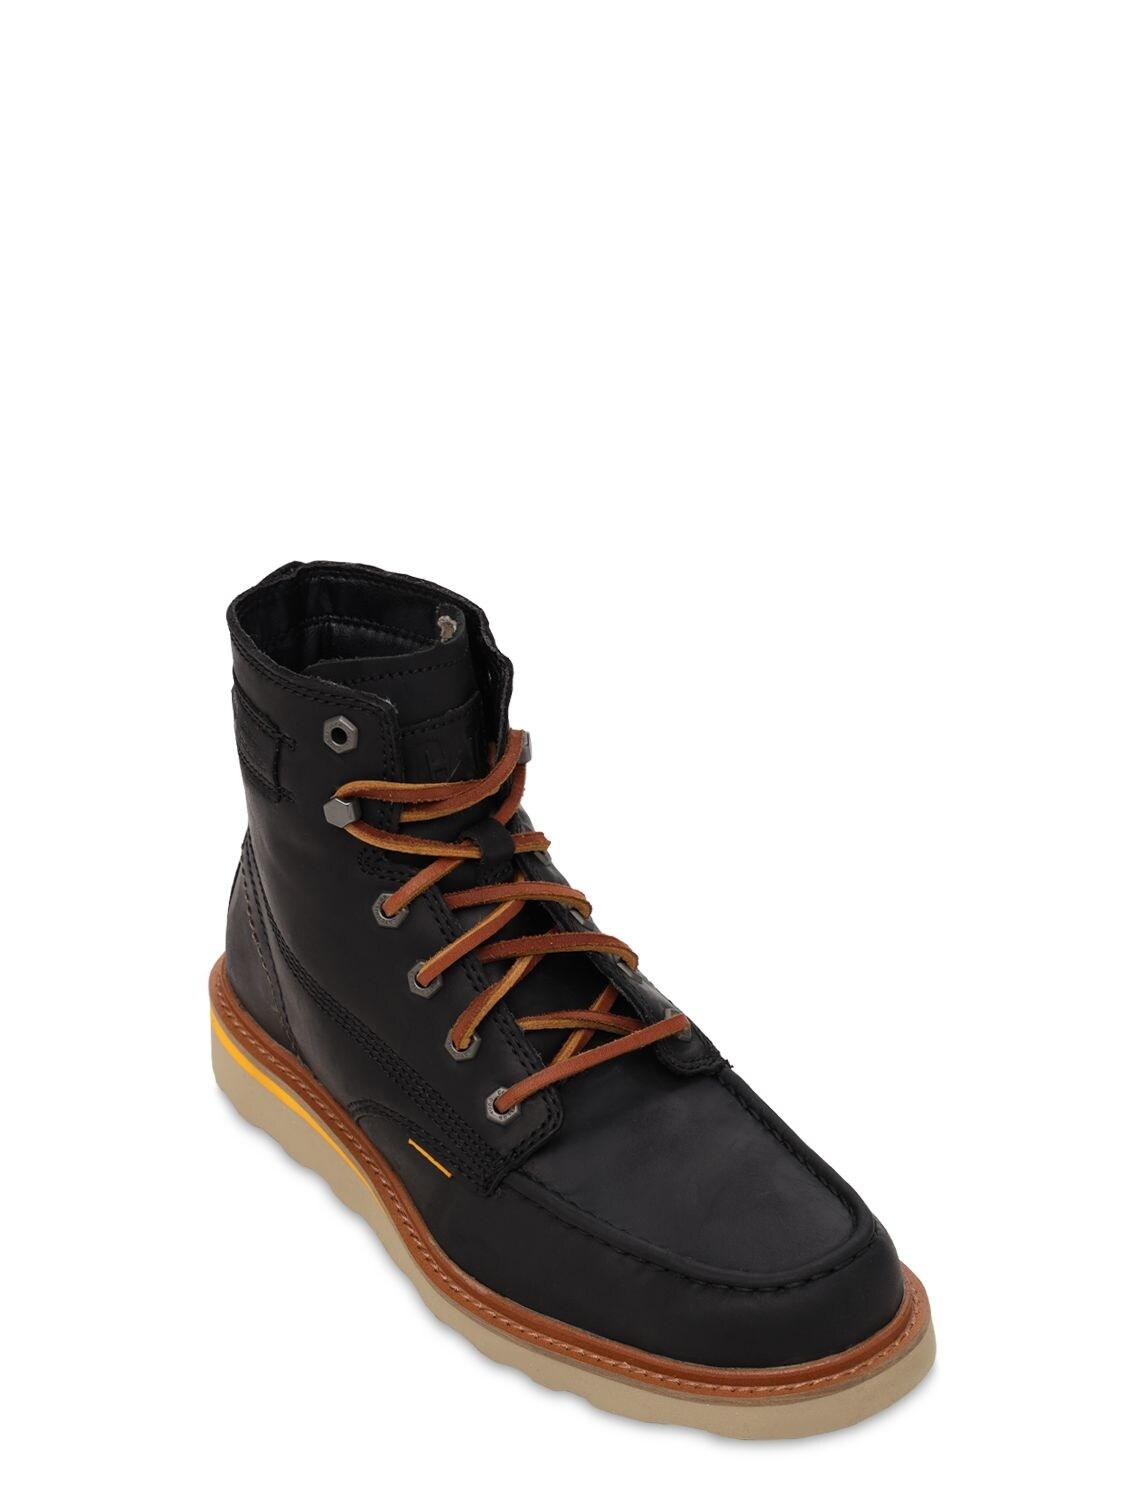 Clothes, Shoes & Accessories Men's Caterpillar Jackson Mid Leather Upper  Breathable Boots in Black Men's Clothing, Shoes & Accessories RD5728902